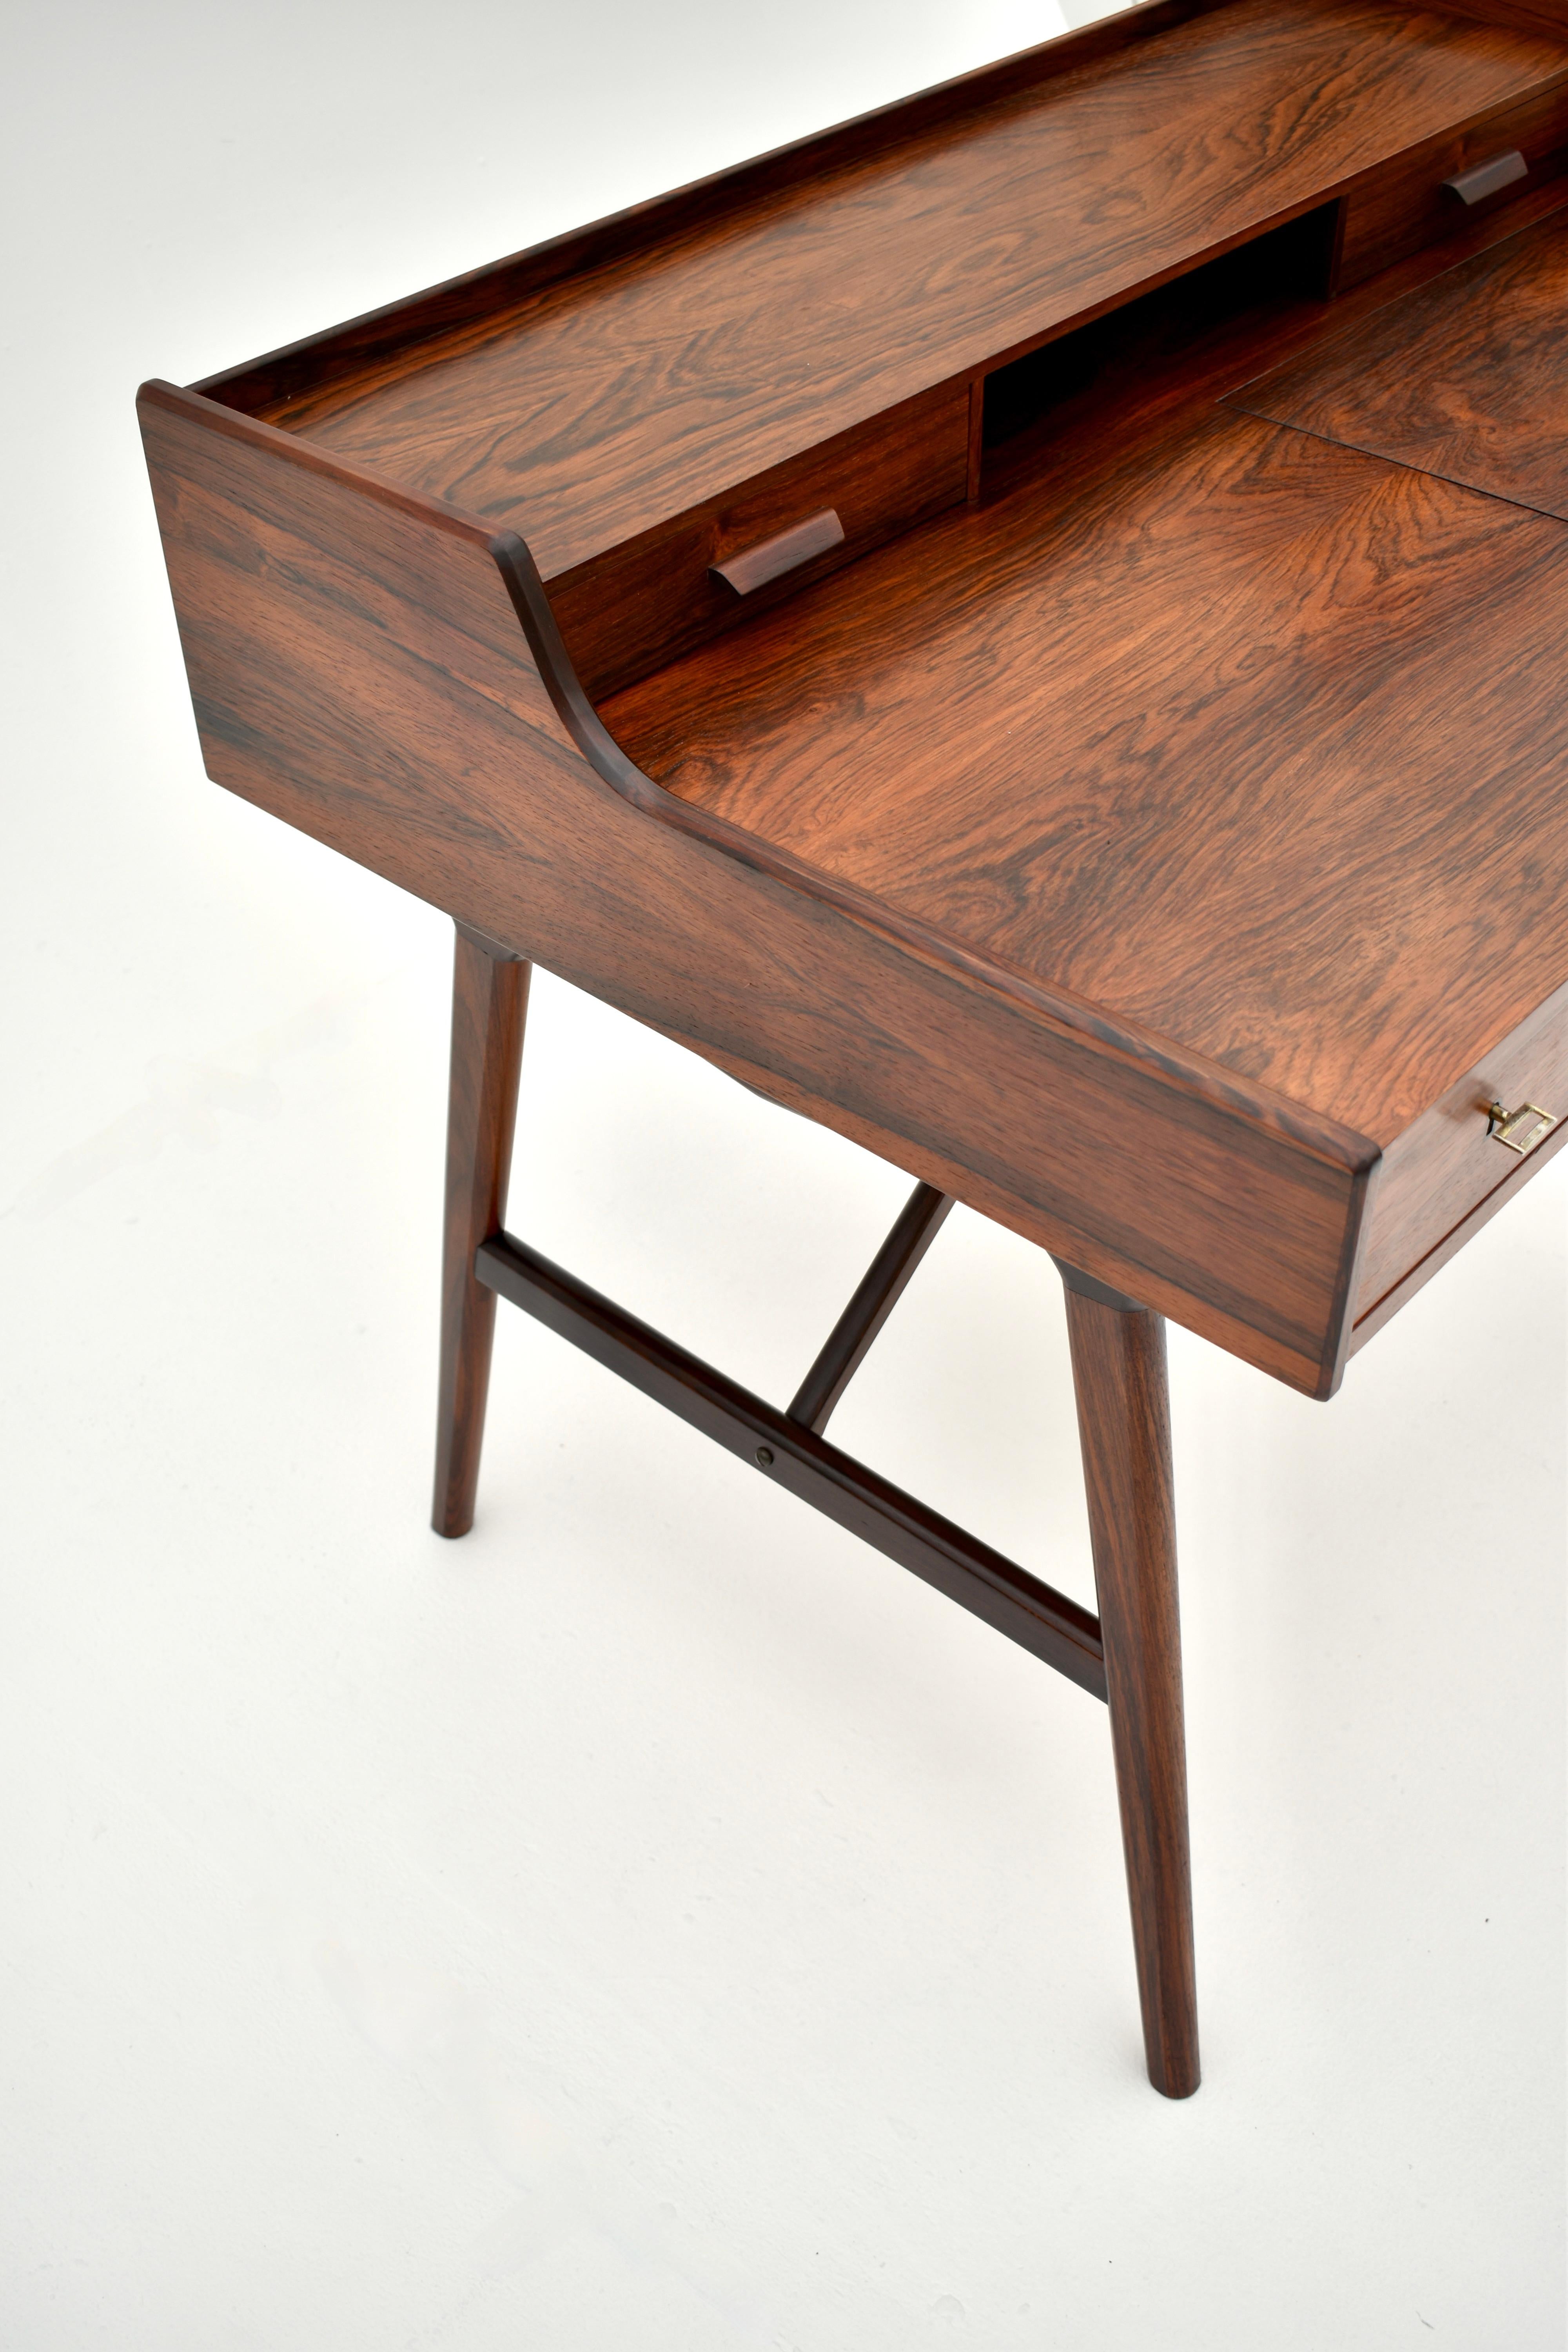 Exquisite Brazilian rosewood vanity table designed in the early 60s by Arne Wahl Iversen for Vinde Mobelfabrik, Denmark.

This item could easily be employed as a writing desk as well as a vanity unit. The compact proportions are particularly